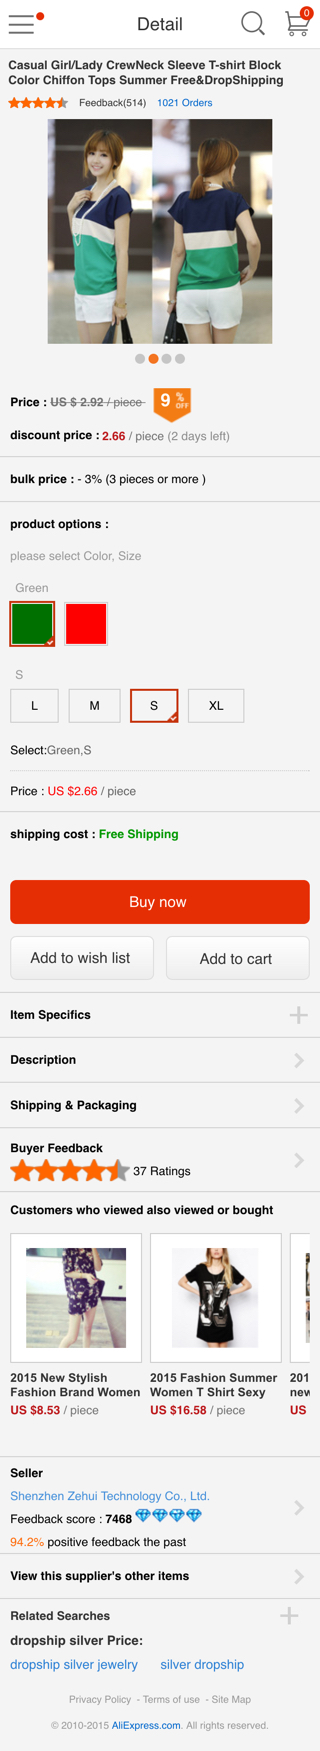 AliExpress mobile product page design example